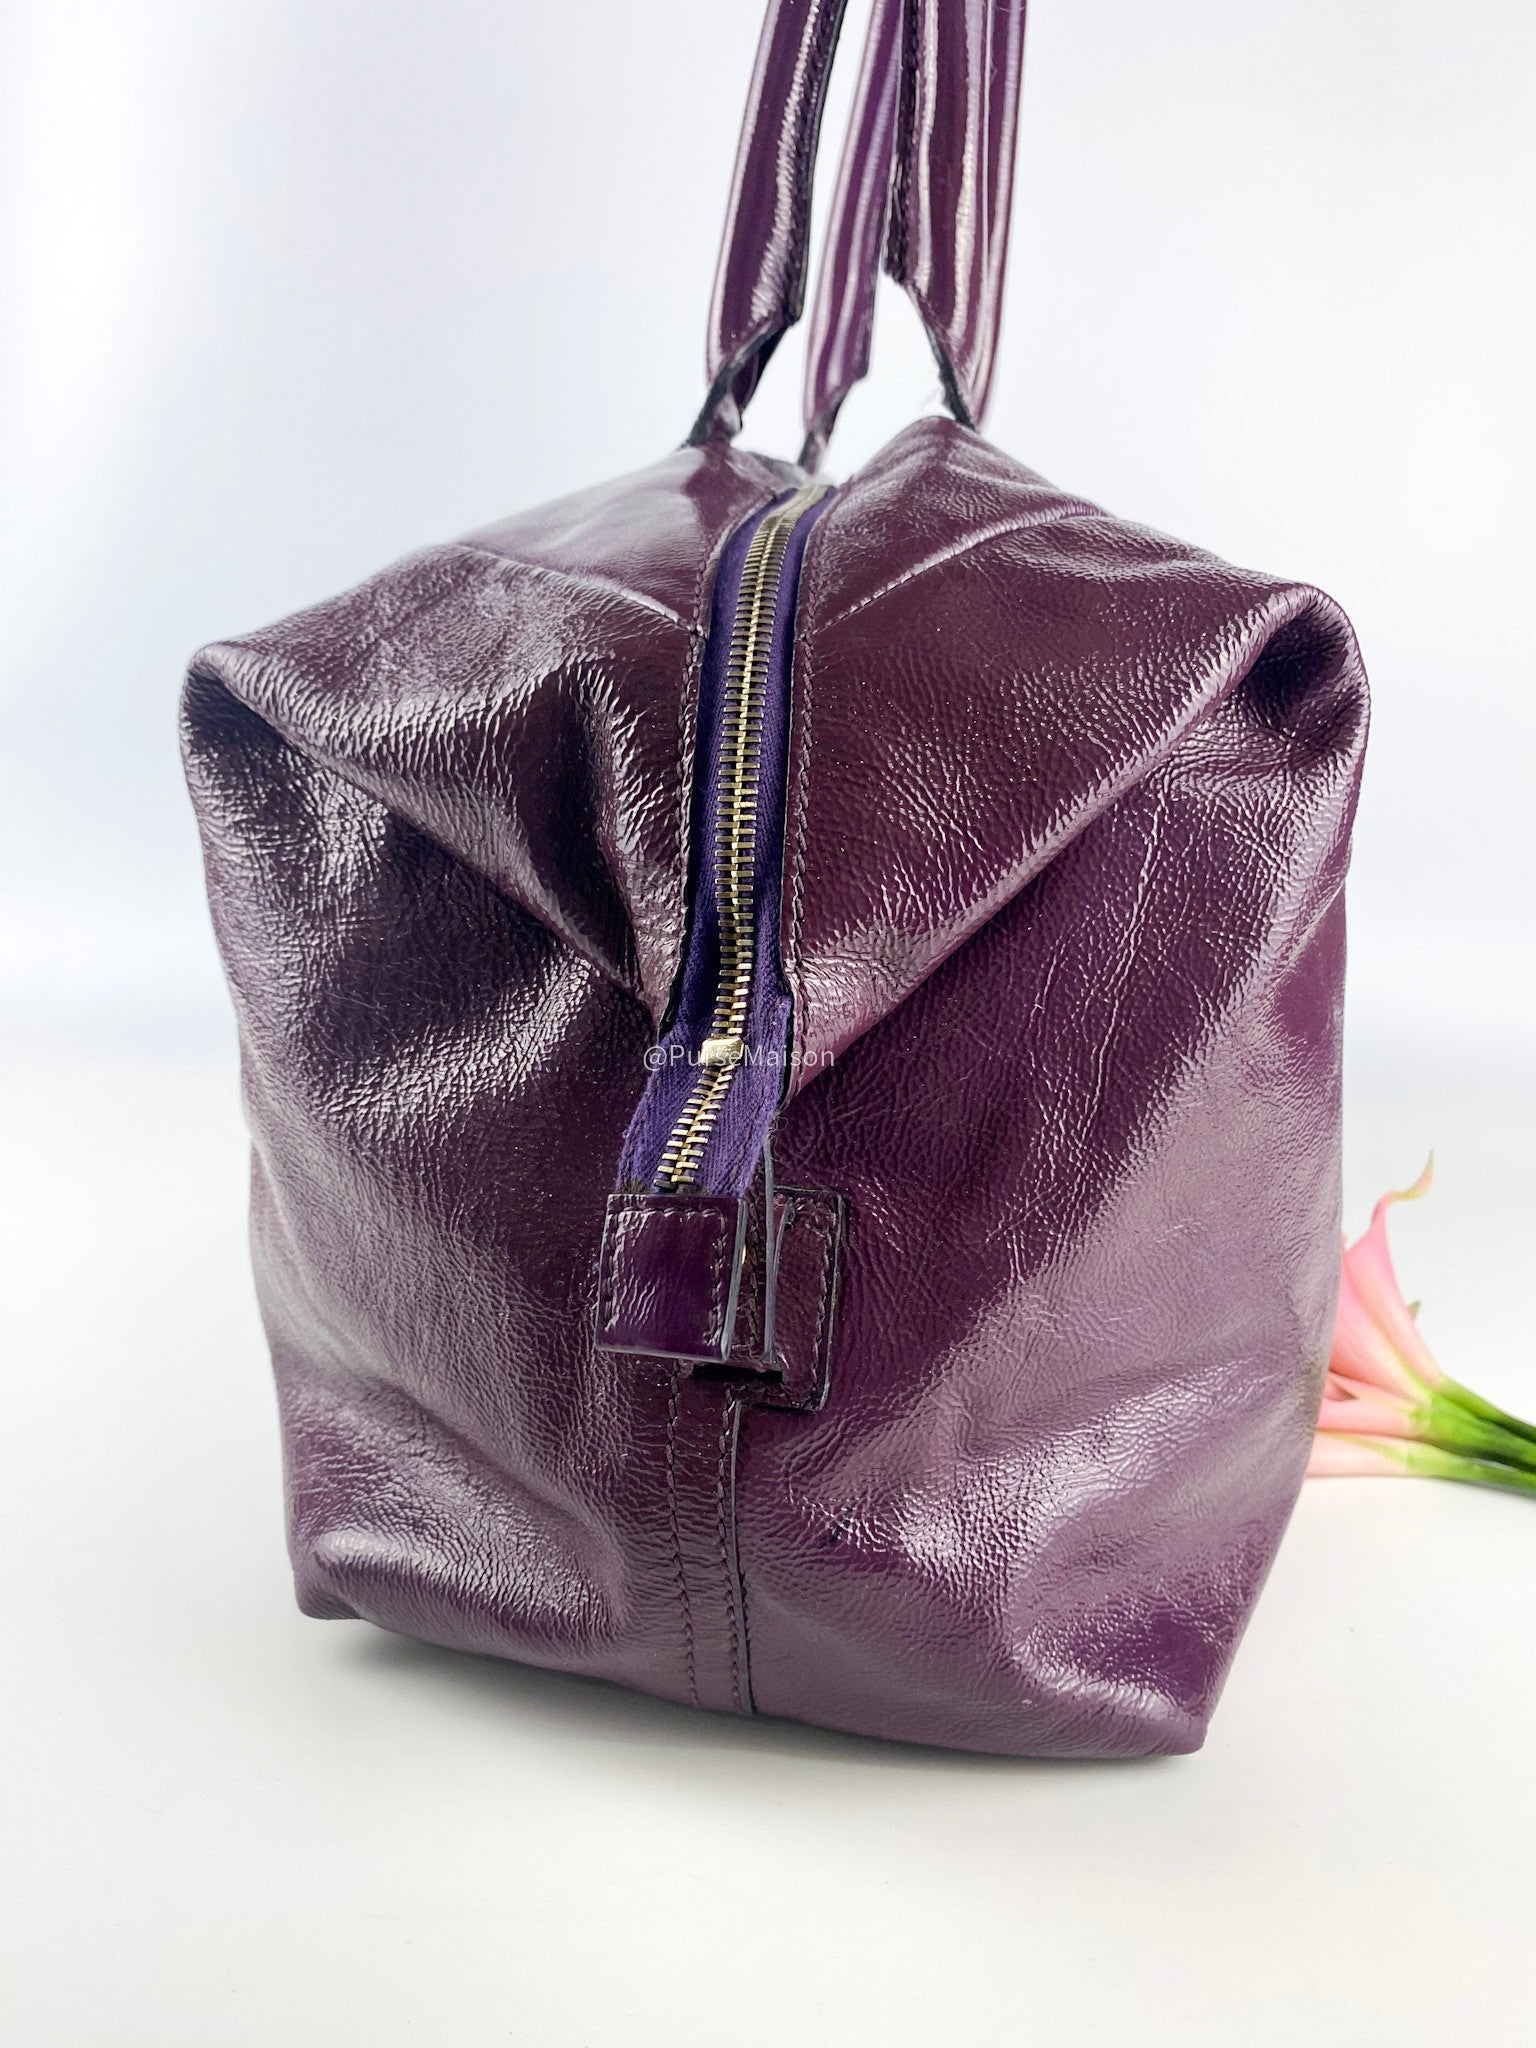 YSL Muse Purple Patent Leather Tote Bag